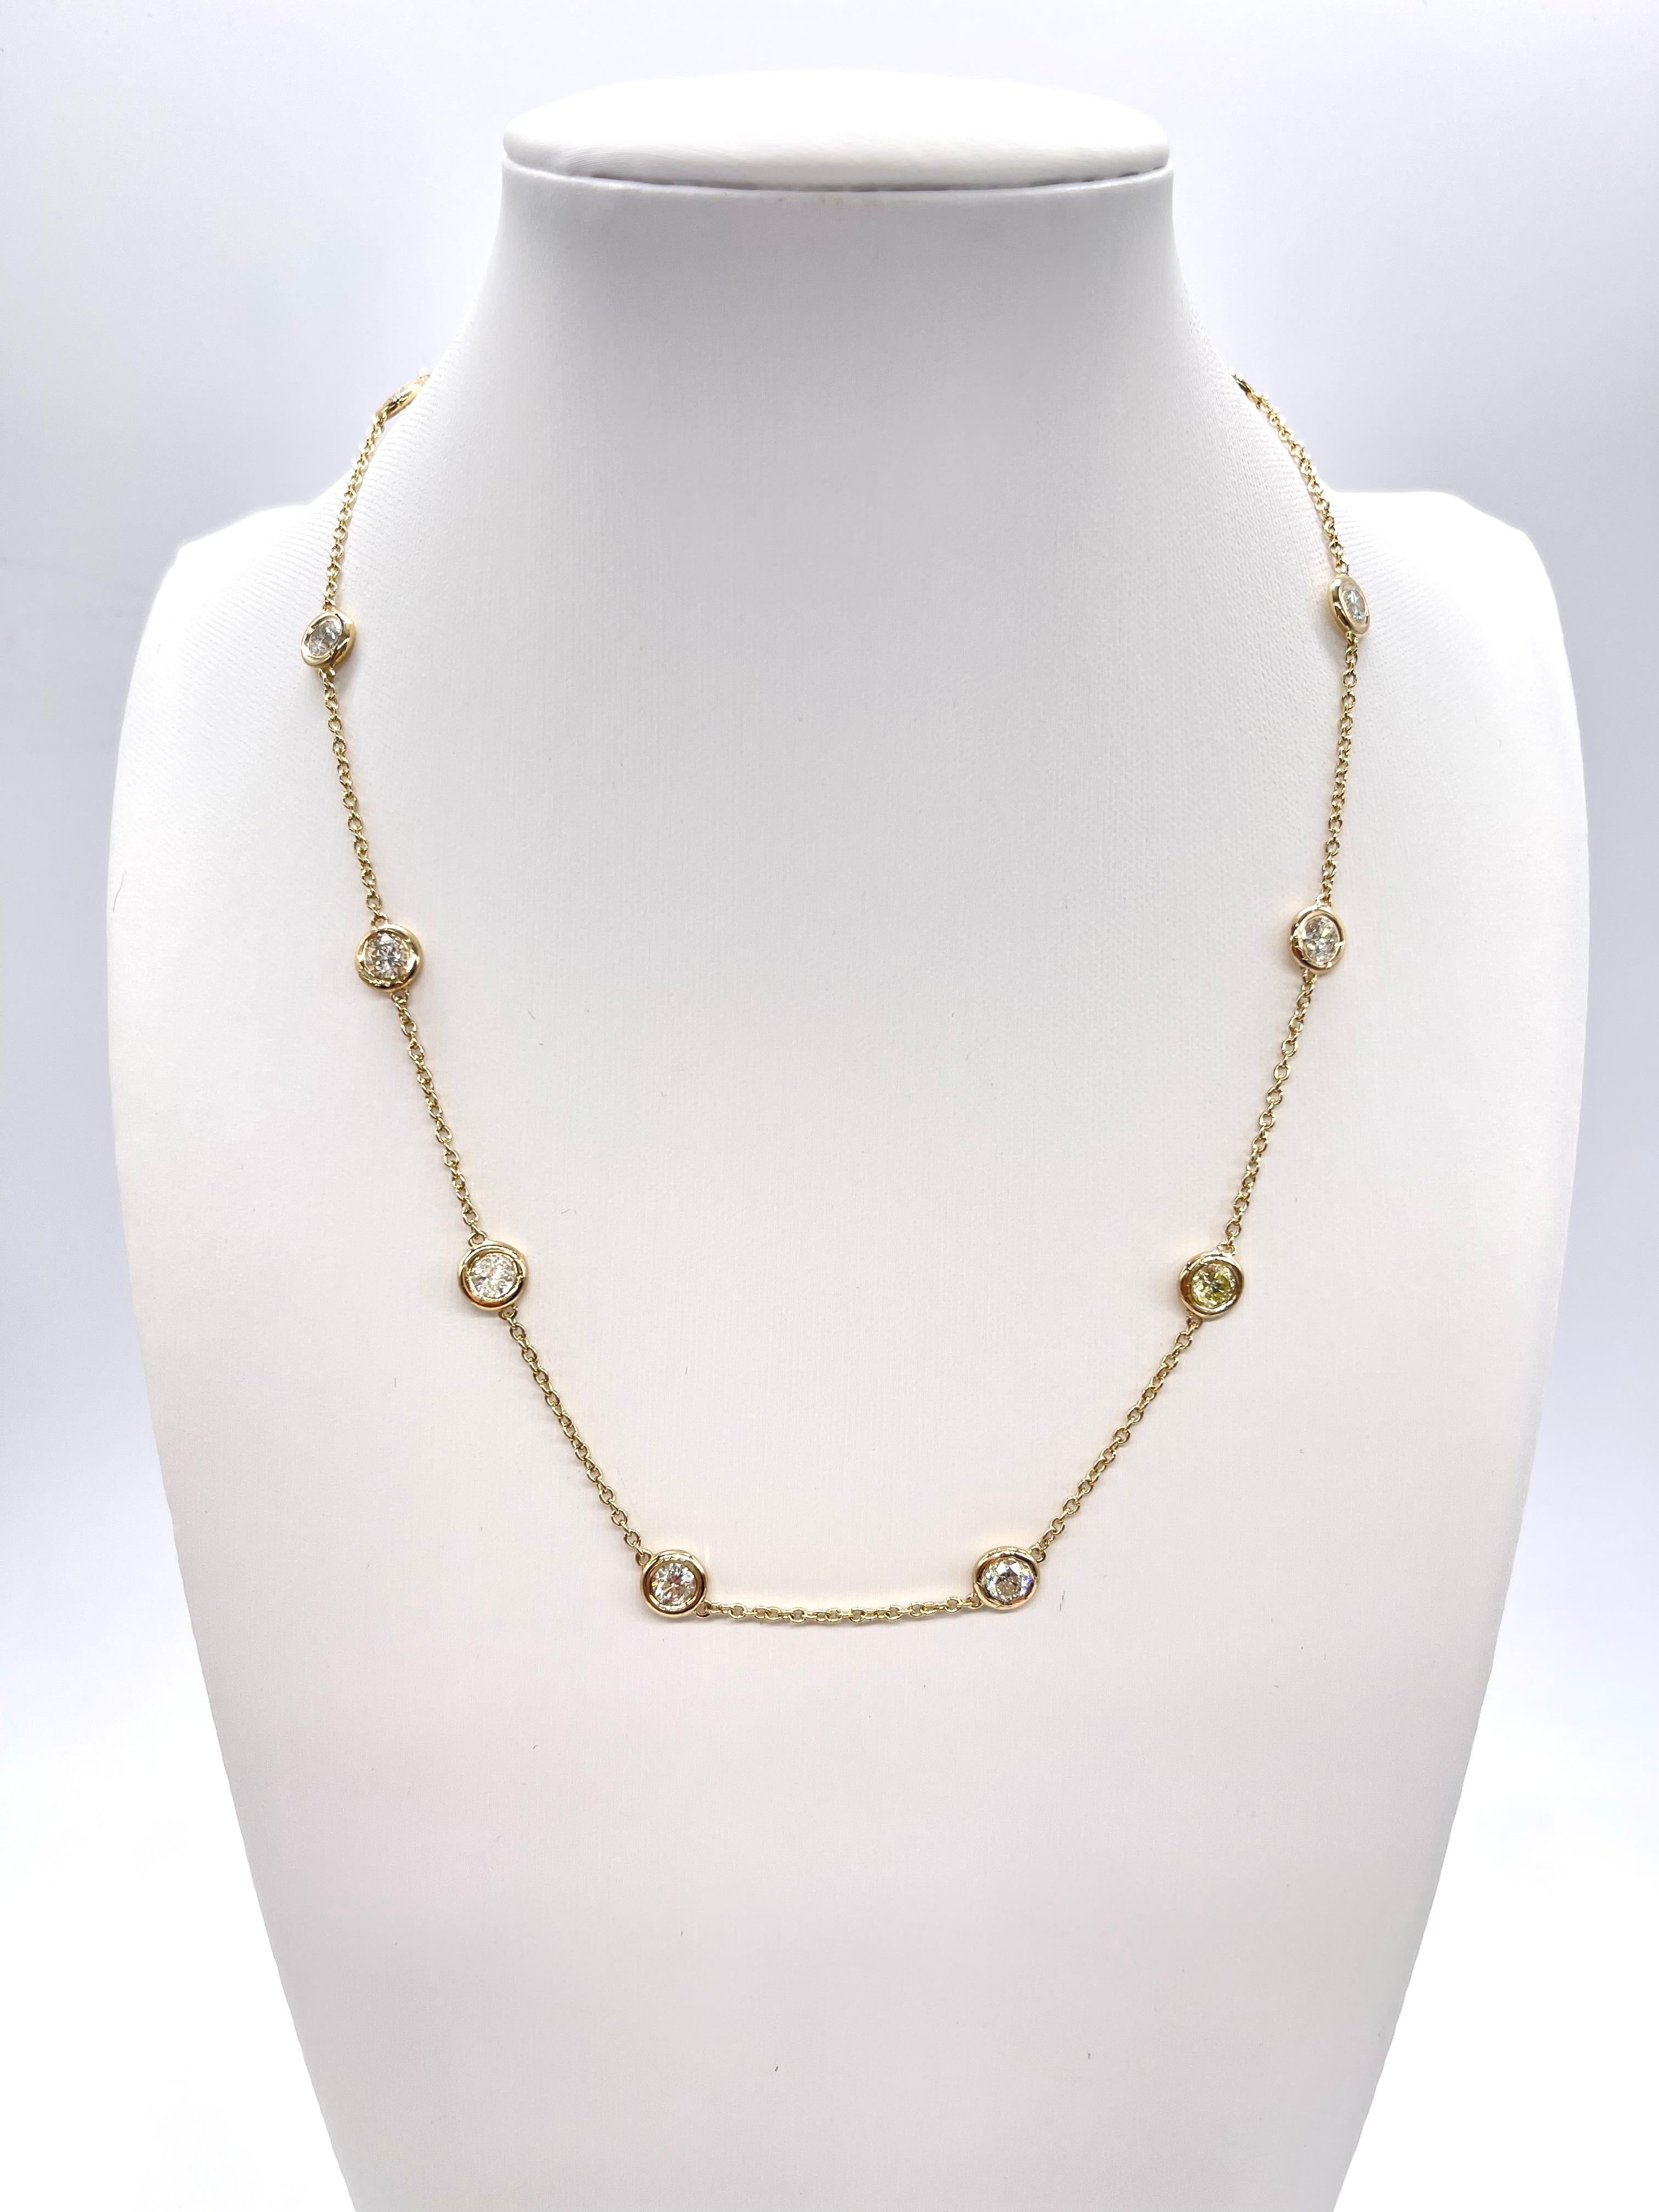 10 Station Diamond by the yard necklace set in Italian made 14K yellow gold. 
Total weight is 2.92 carats. Beautiful shiny stones. 
Length 16 inch 6.64 grams. Average H-I,SI Natural Diamond

*Free shipping within U.S*